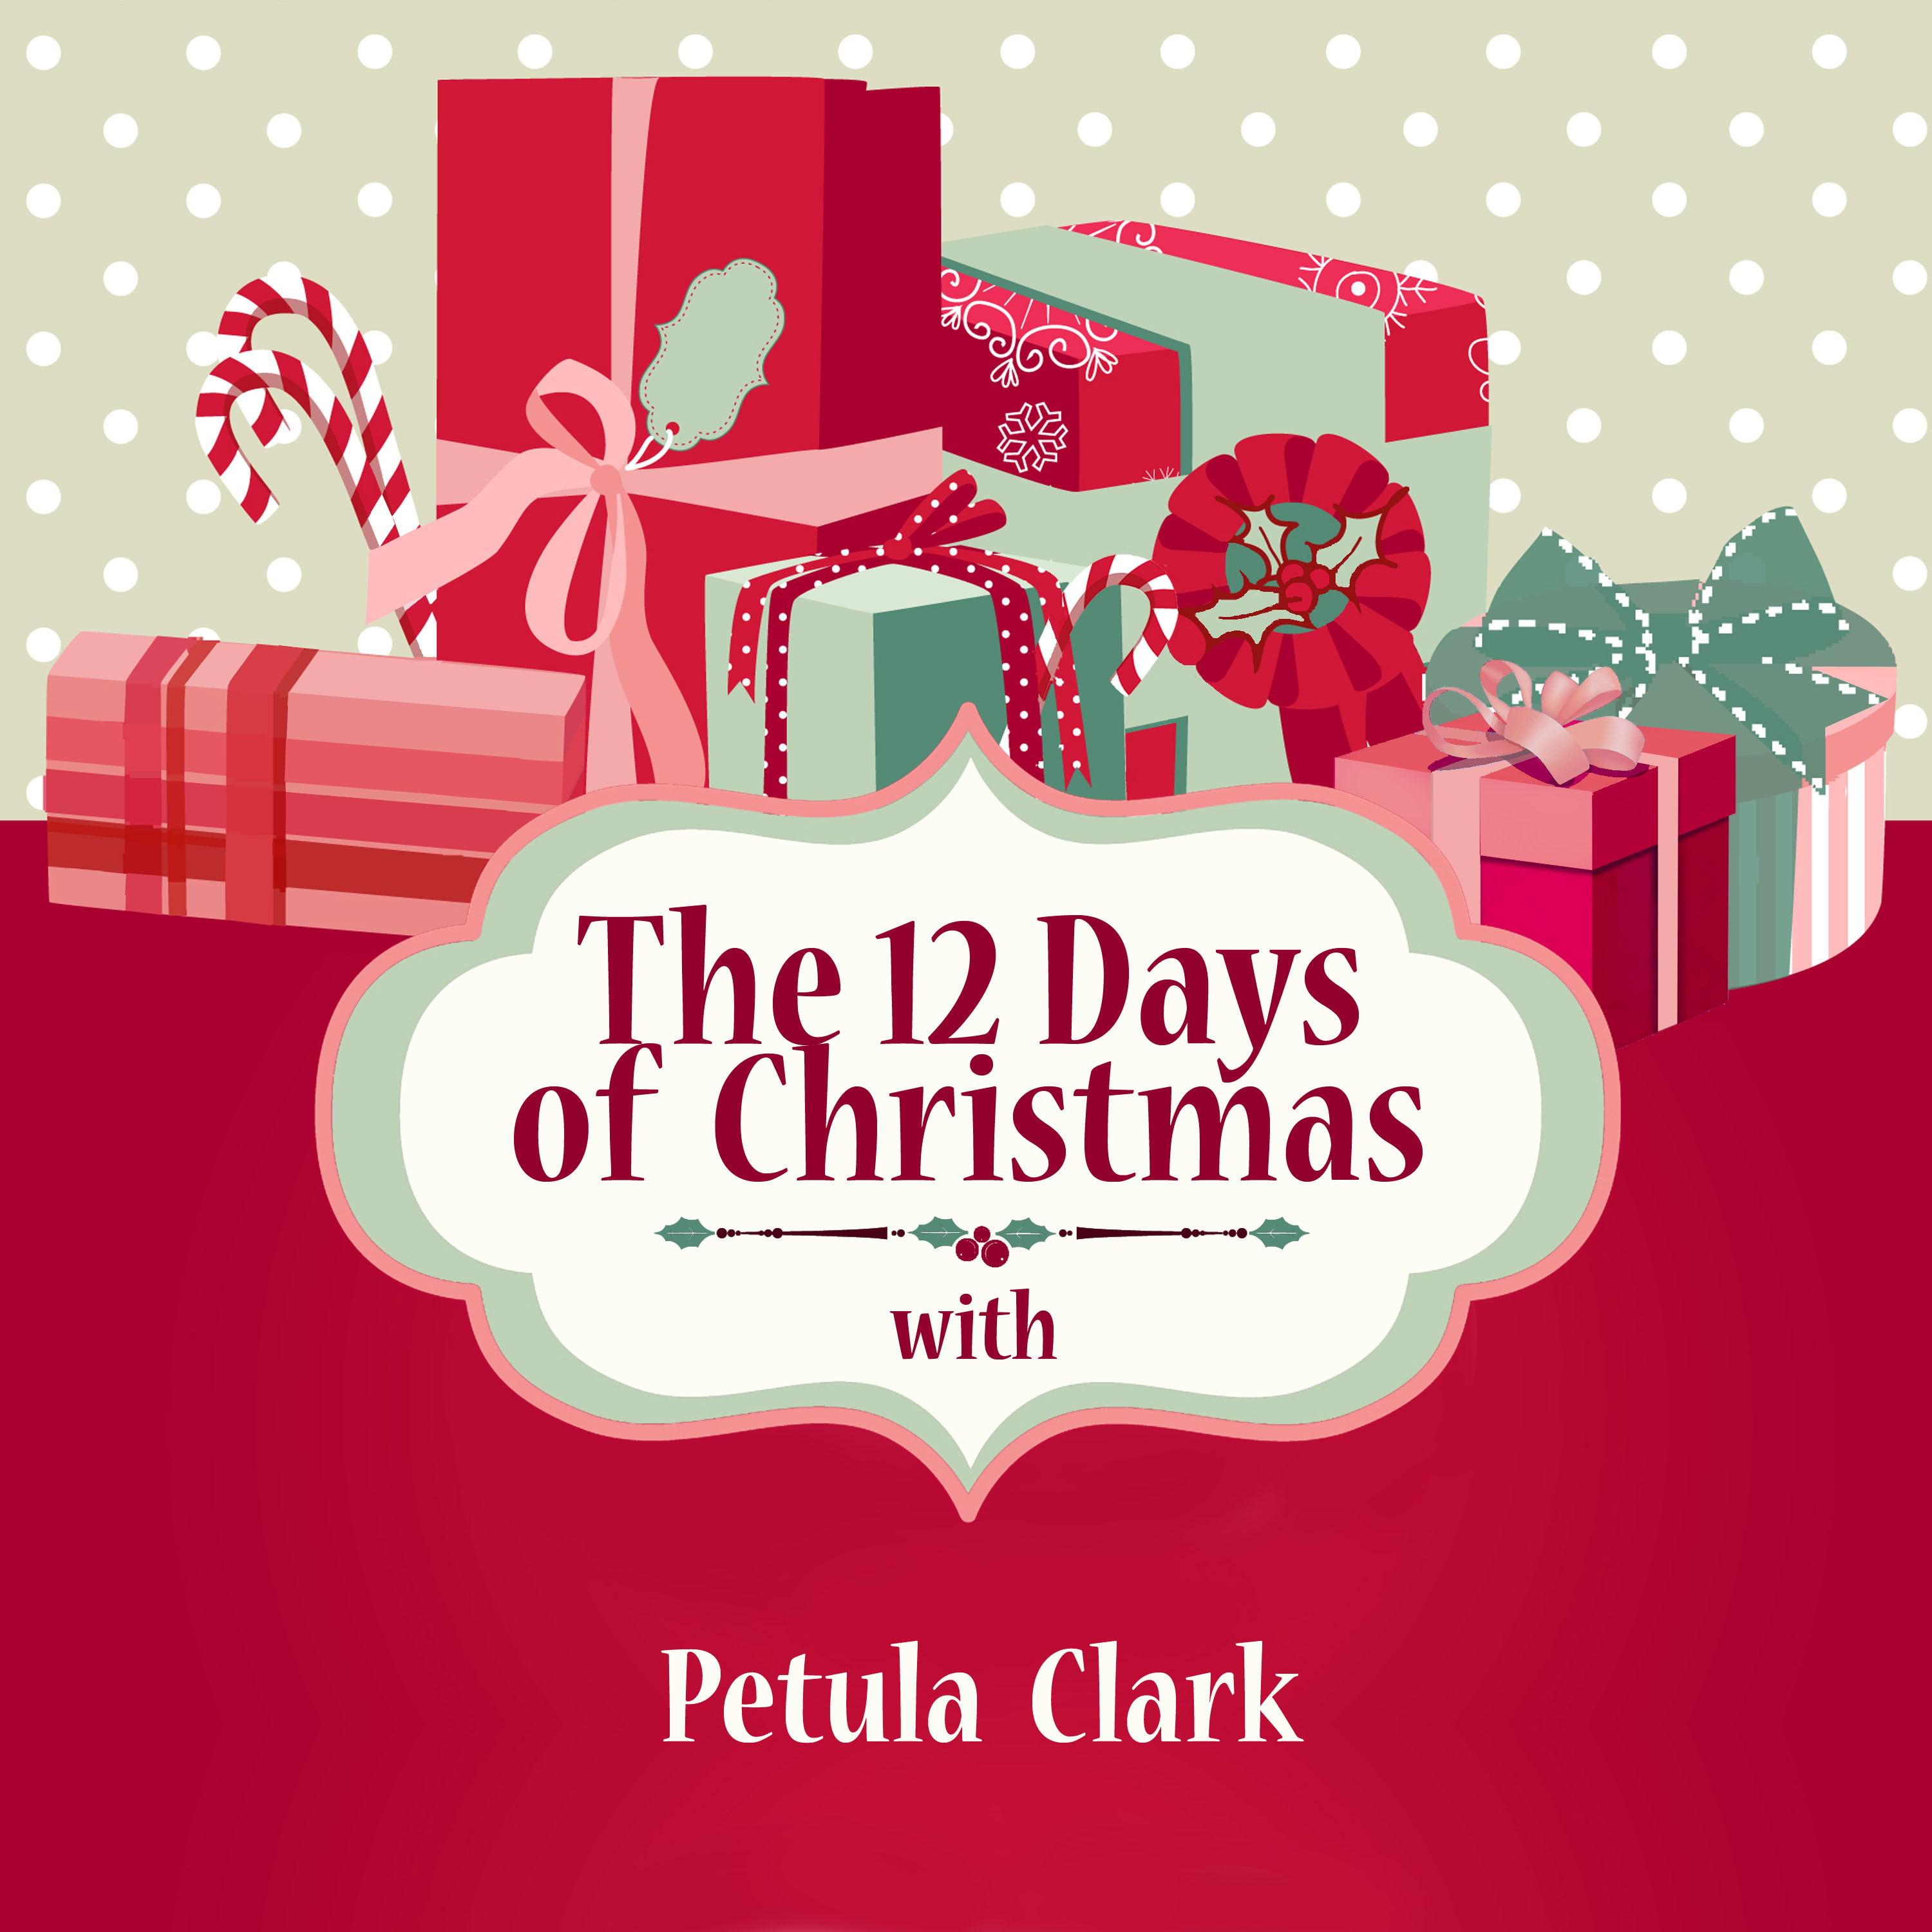 The 12 Days of Christmas with Petula Clark